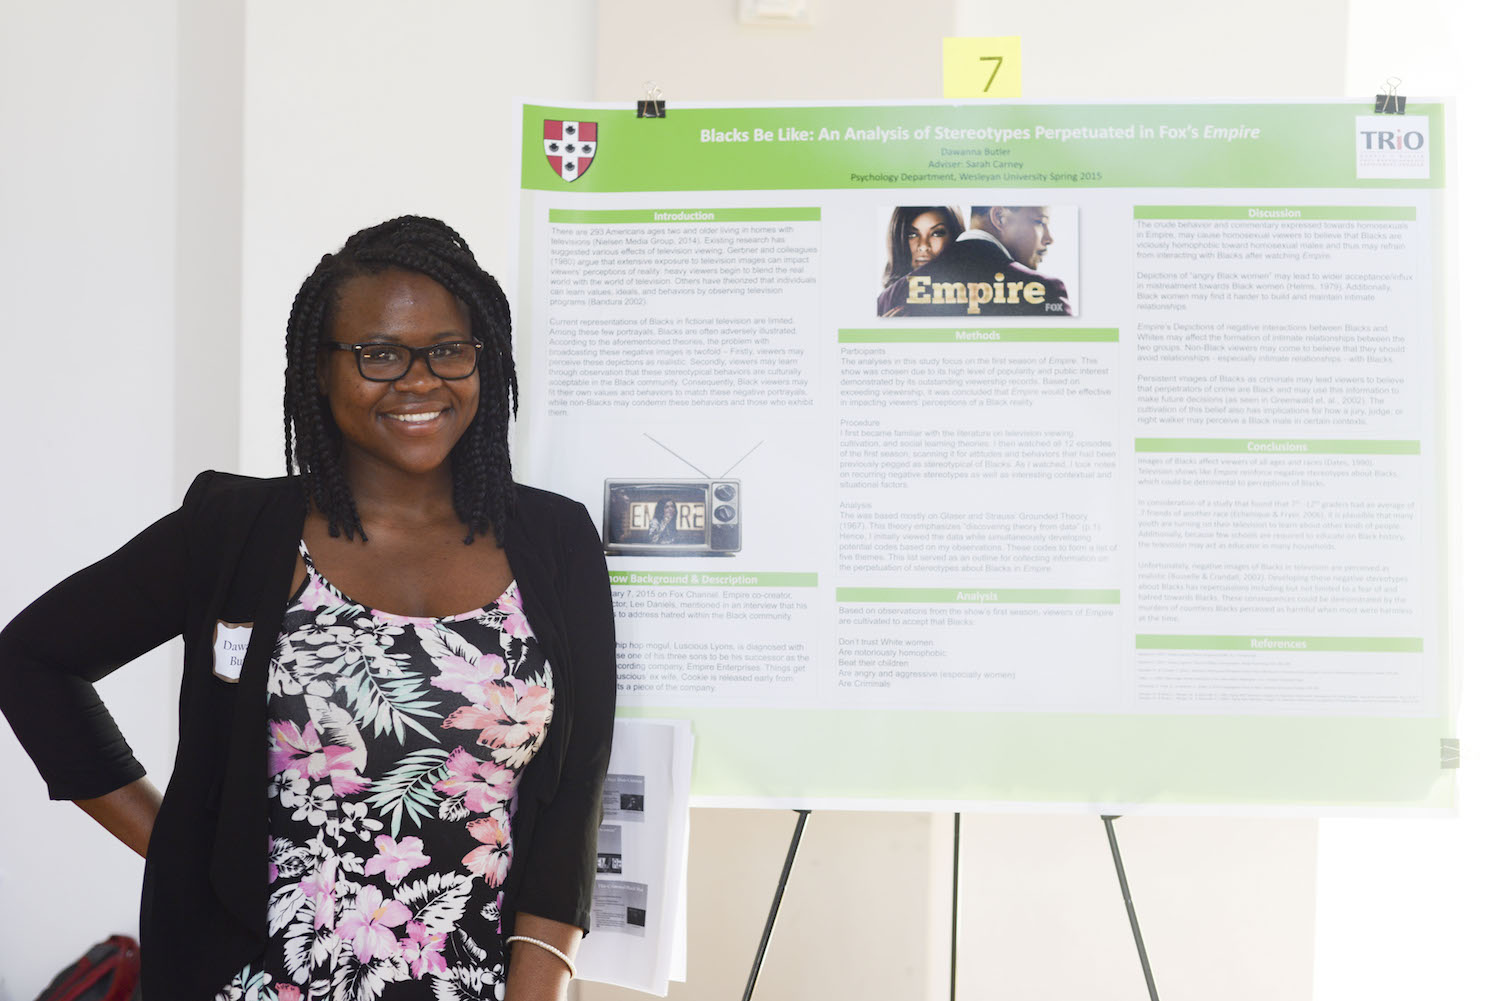 Dawanna Butler '15 with her poster, "Blacks Be Like: An Analysis of Stereotypes Perpetuated in Fox's Empire." 